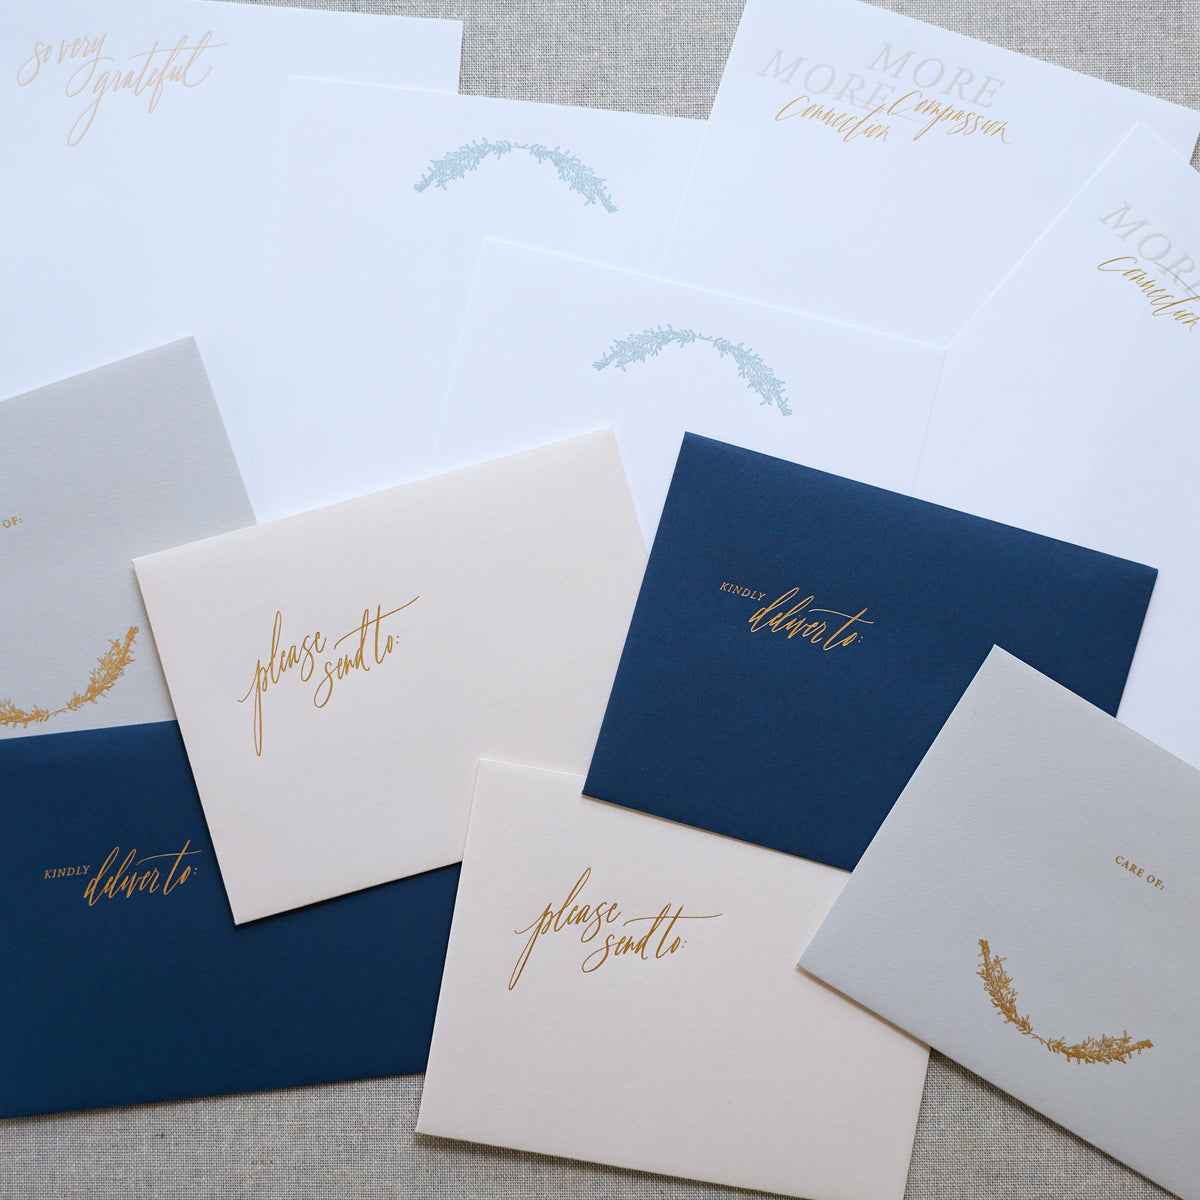 Variety of hand pressed stationery and matching envelopes.